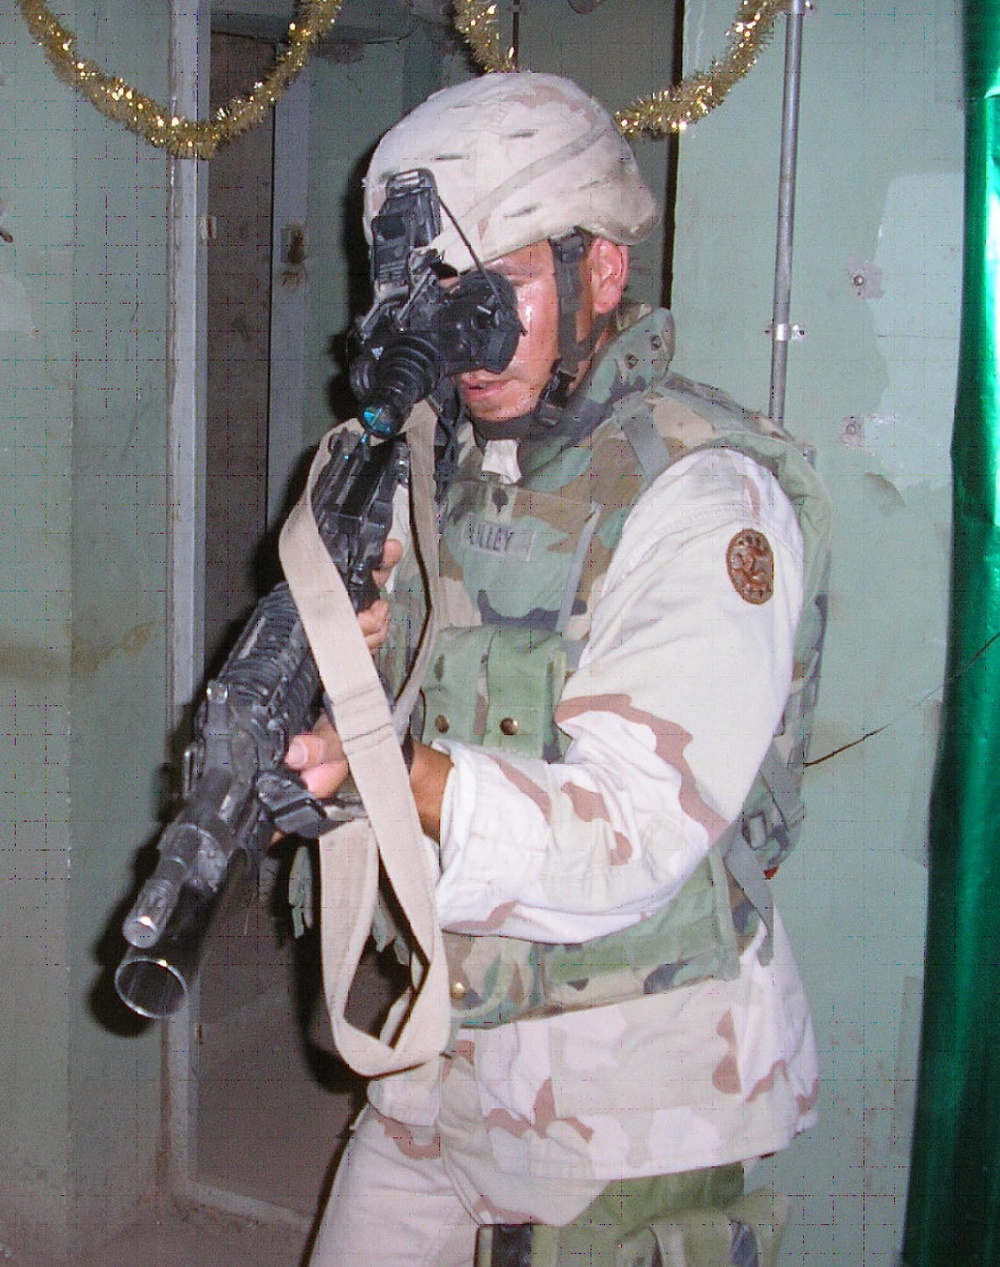 A Soldier enters a building wearing night vision goggles during urban operations